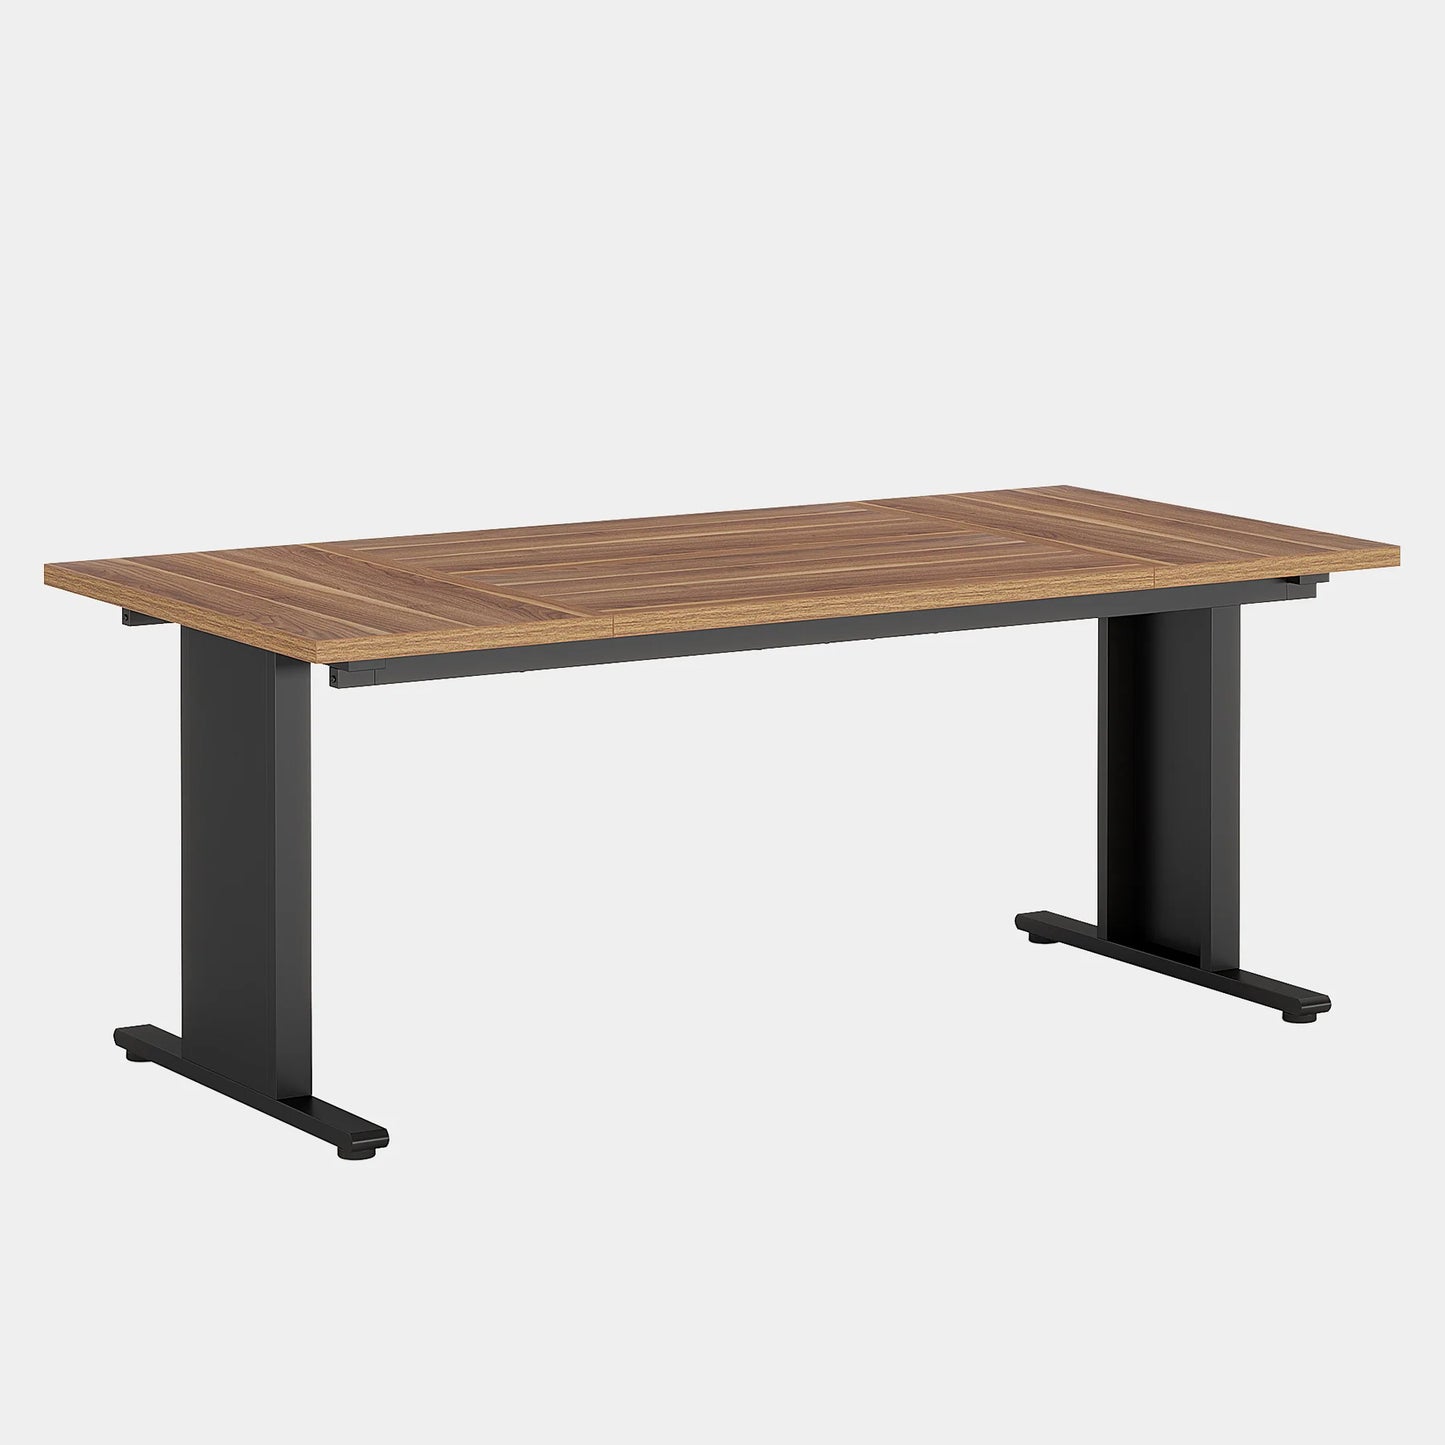 6FT Conference Table, 62.99” Rectangular Meeting Table Boardroom Desk